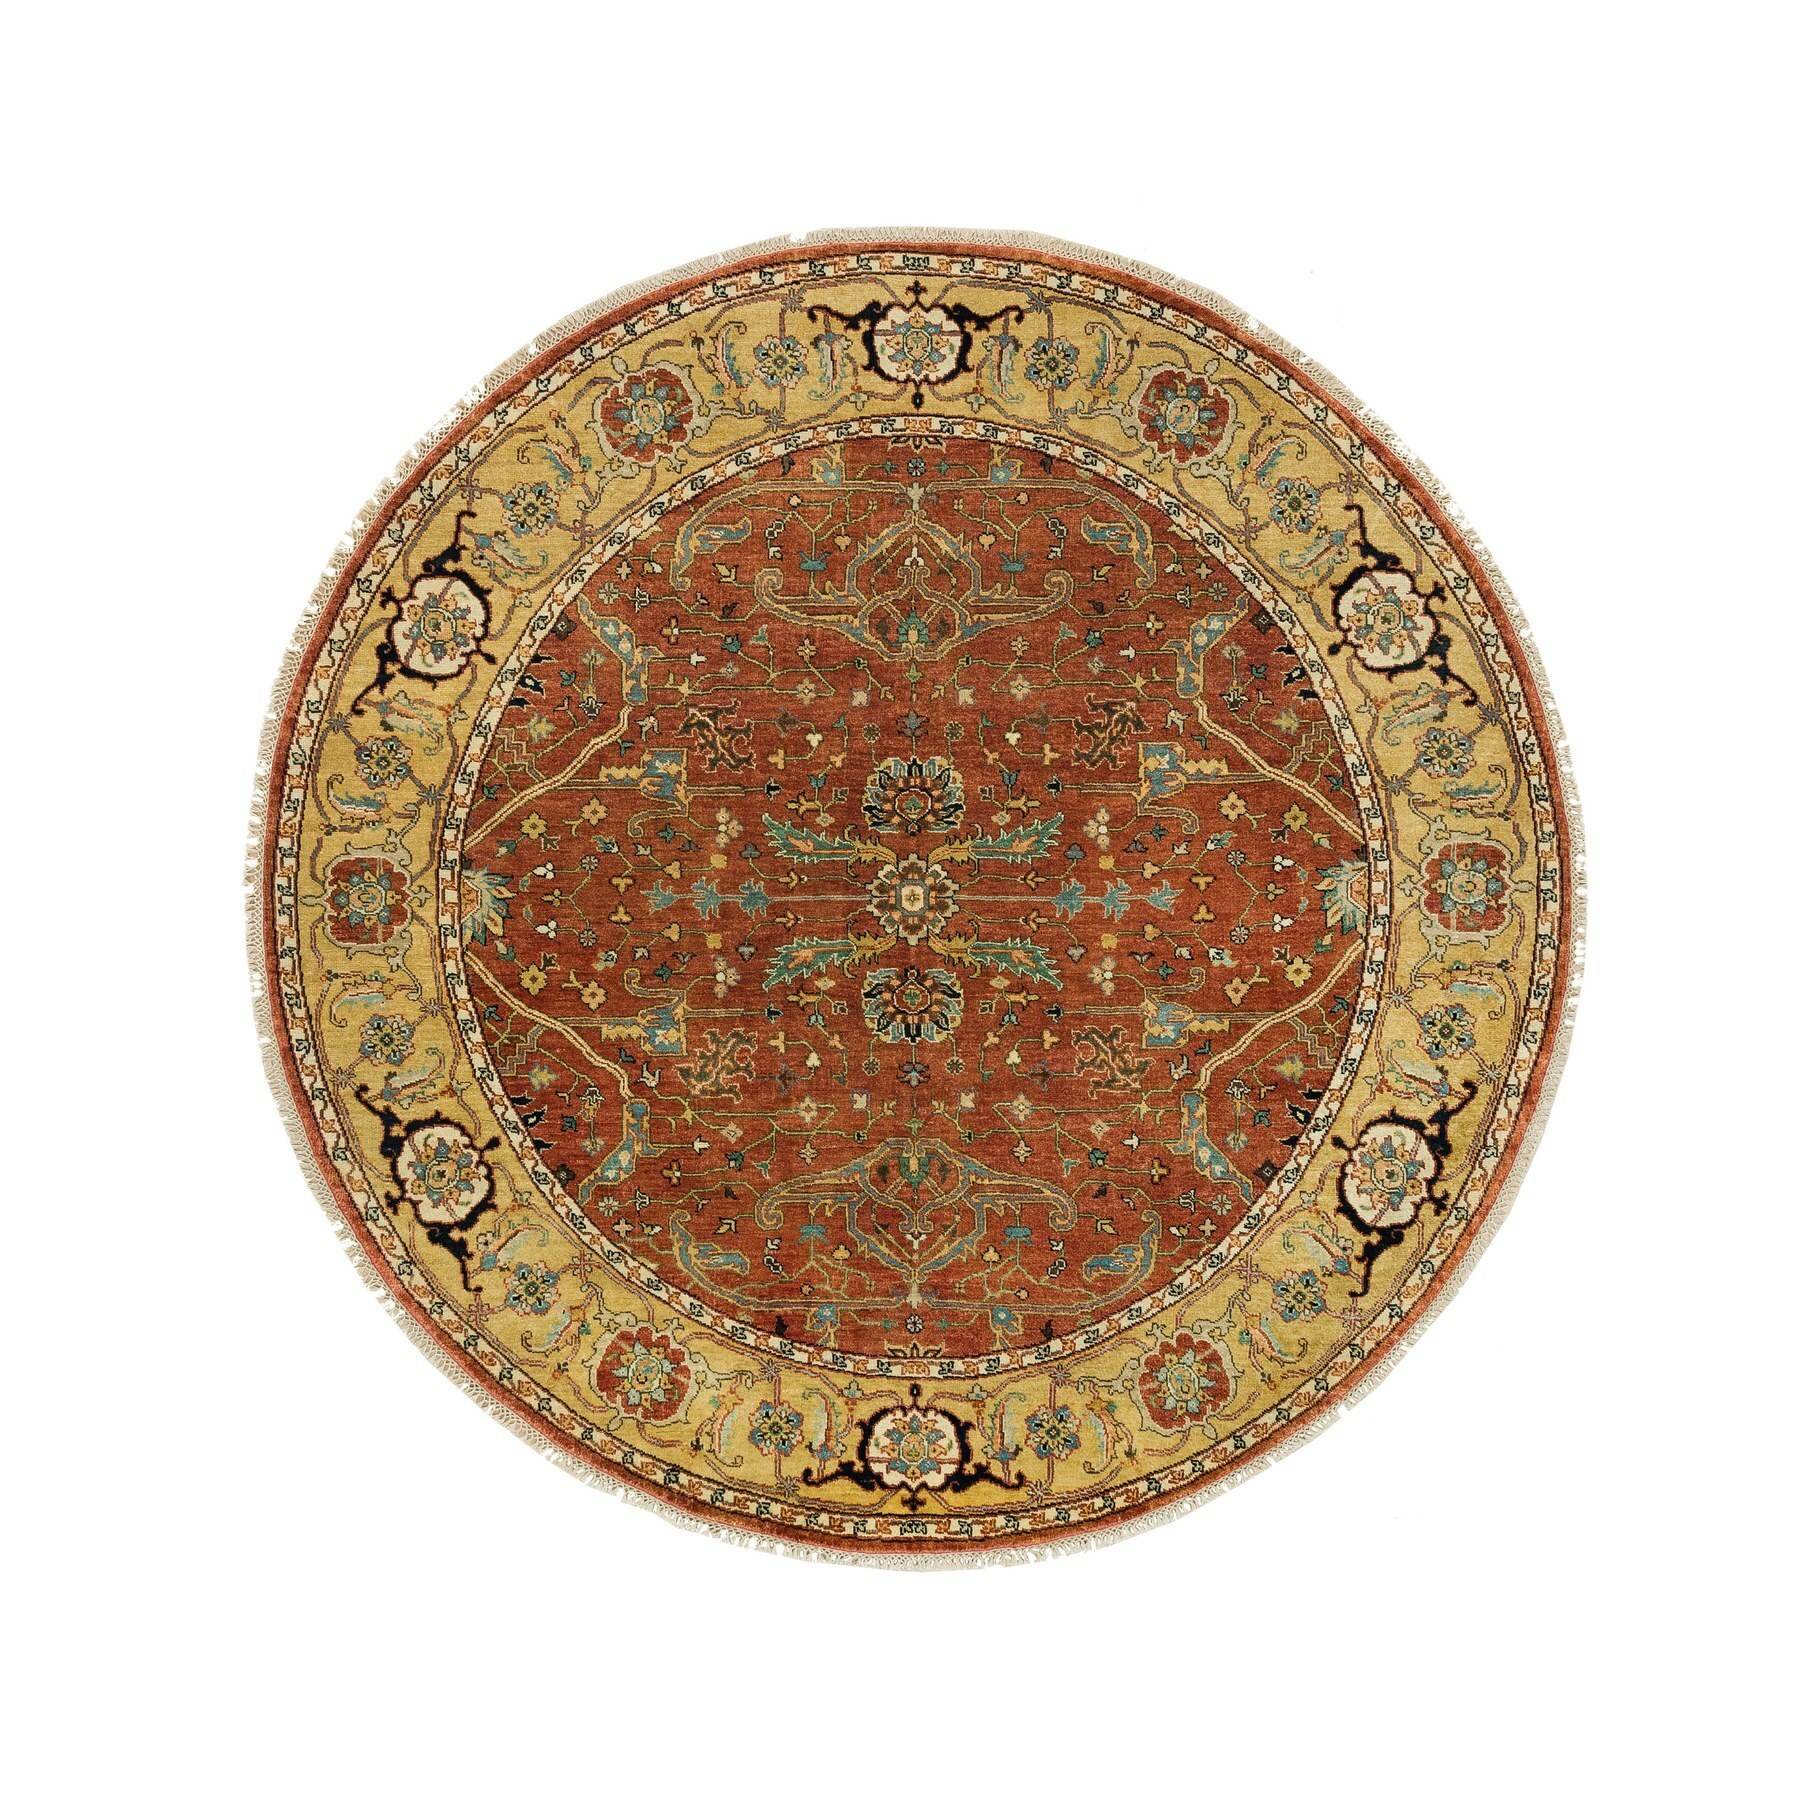 6'x6' Rust Red, Hand Woven, Pure Wool, Vegetable Dyes, Antiqued Fine Heriz Re-Creation, Round Oriental Rug 